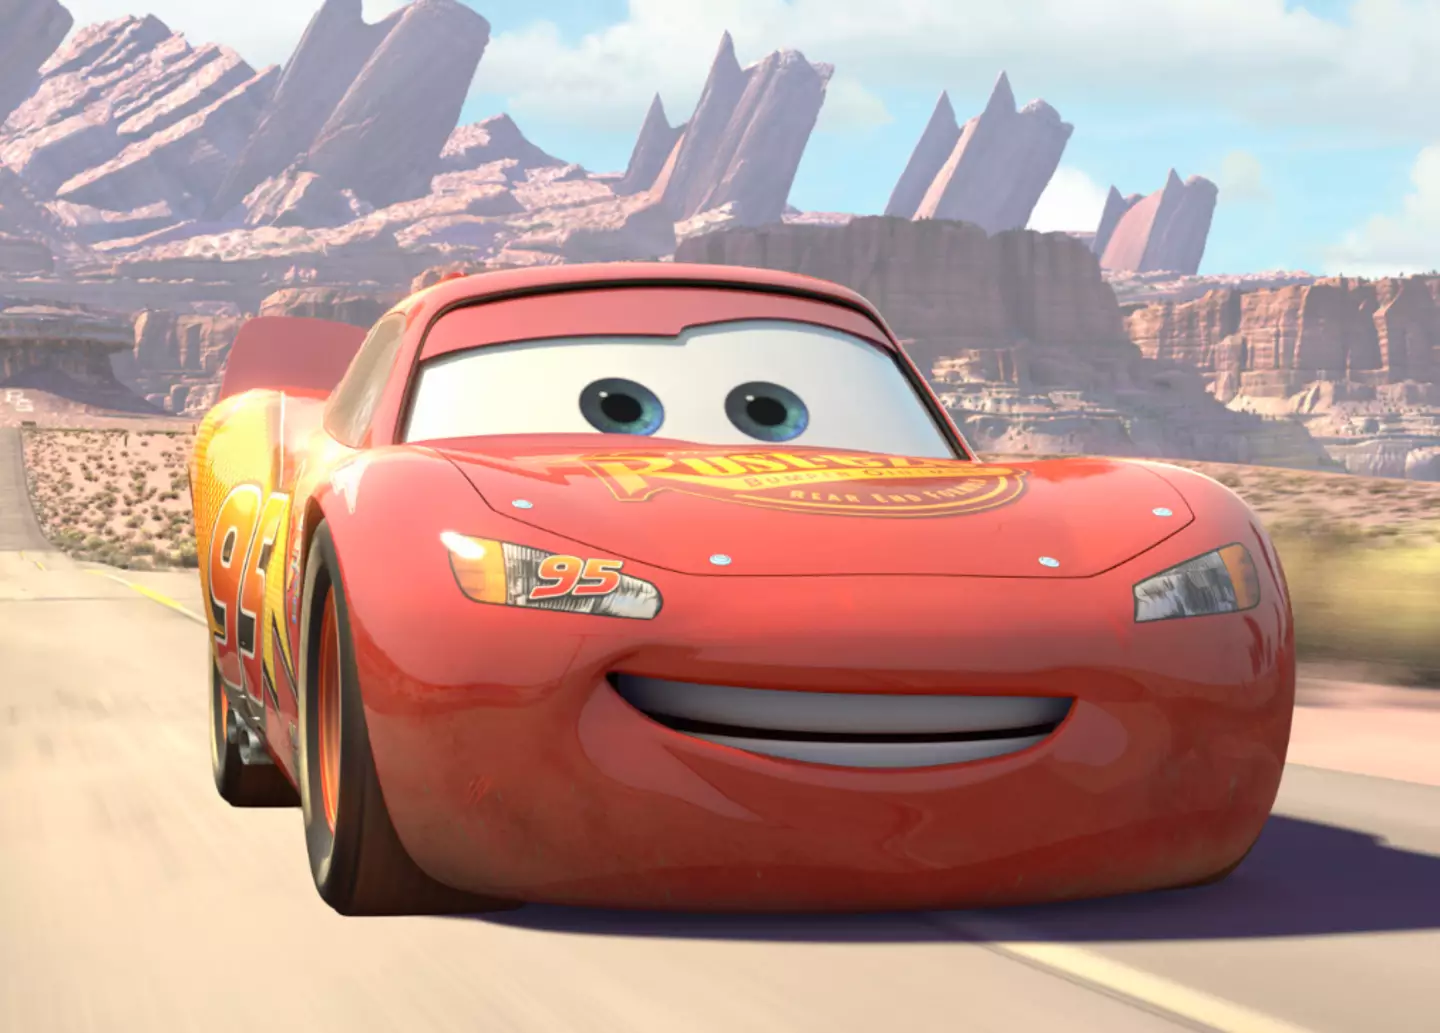 Cars has numerous hidden NSFW references.